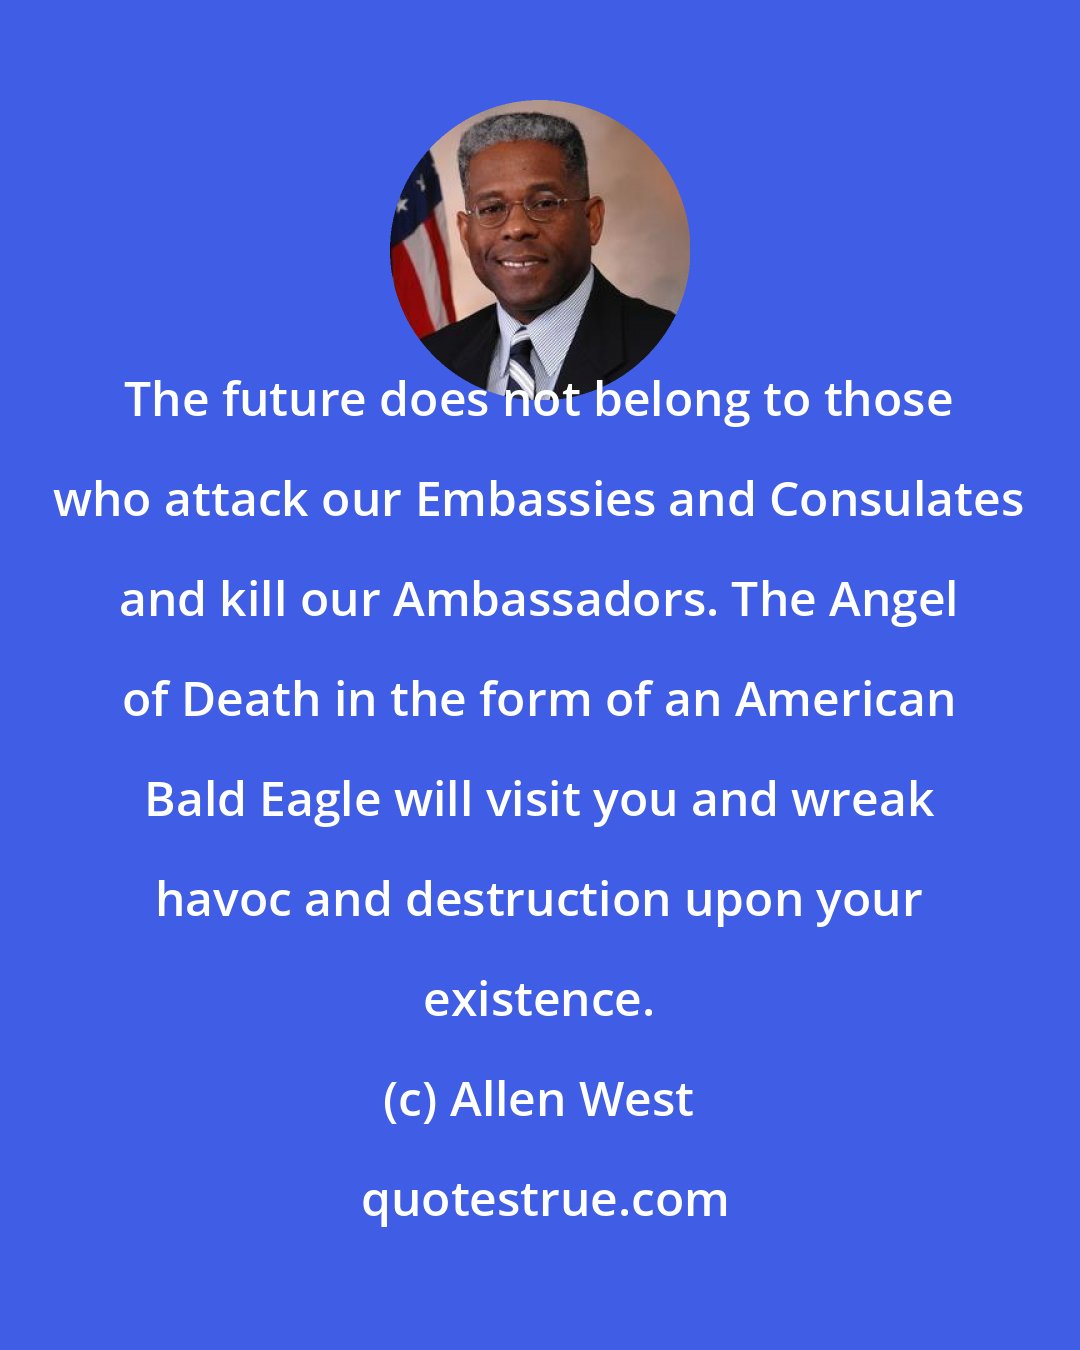 Allen West: The future does not belong to those who attack our Embassies and Consulates and kill our Ambassadors. The Angel of Death in the form of an American Bald Eagle will visit you and wreak havoc and destruction upon your existence.